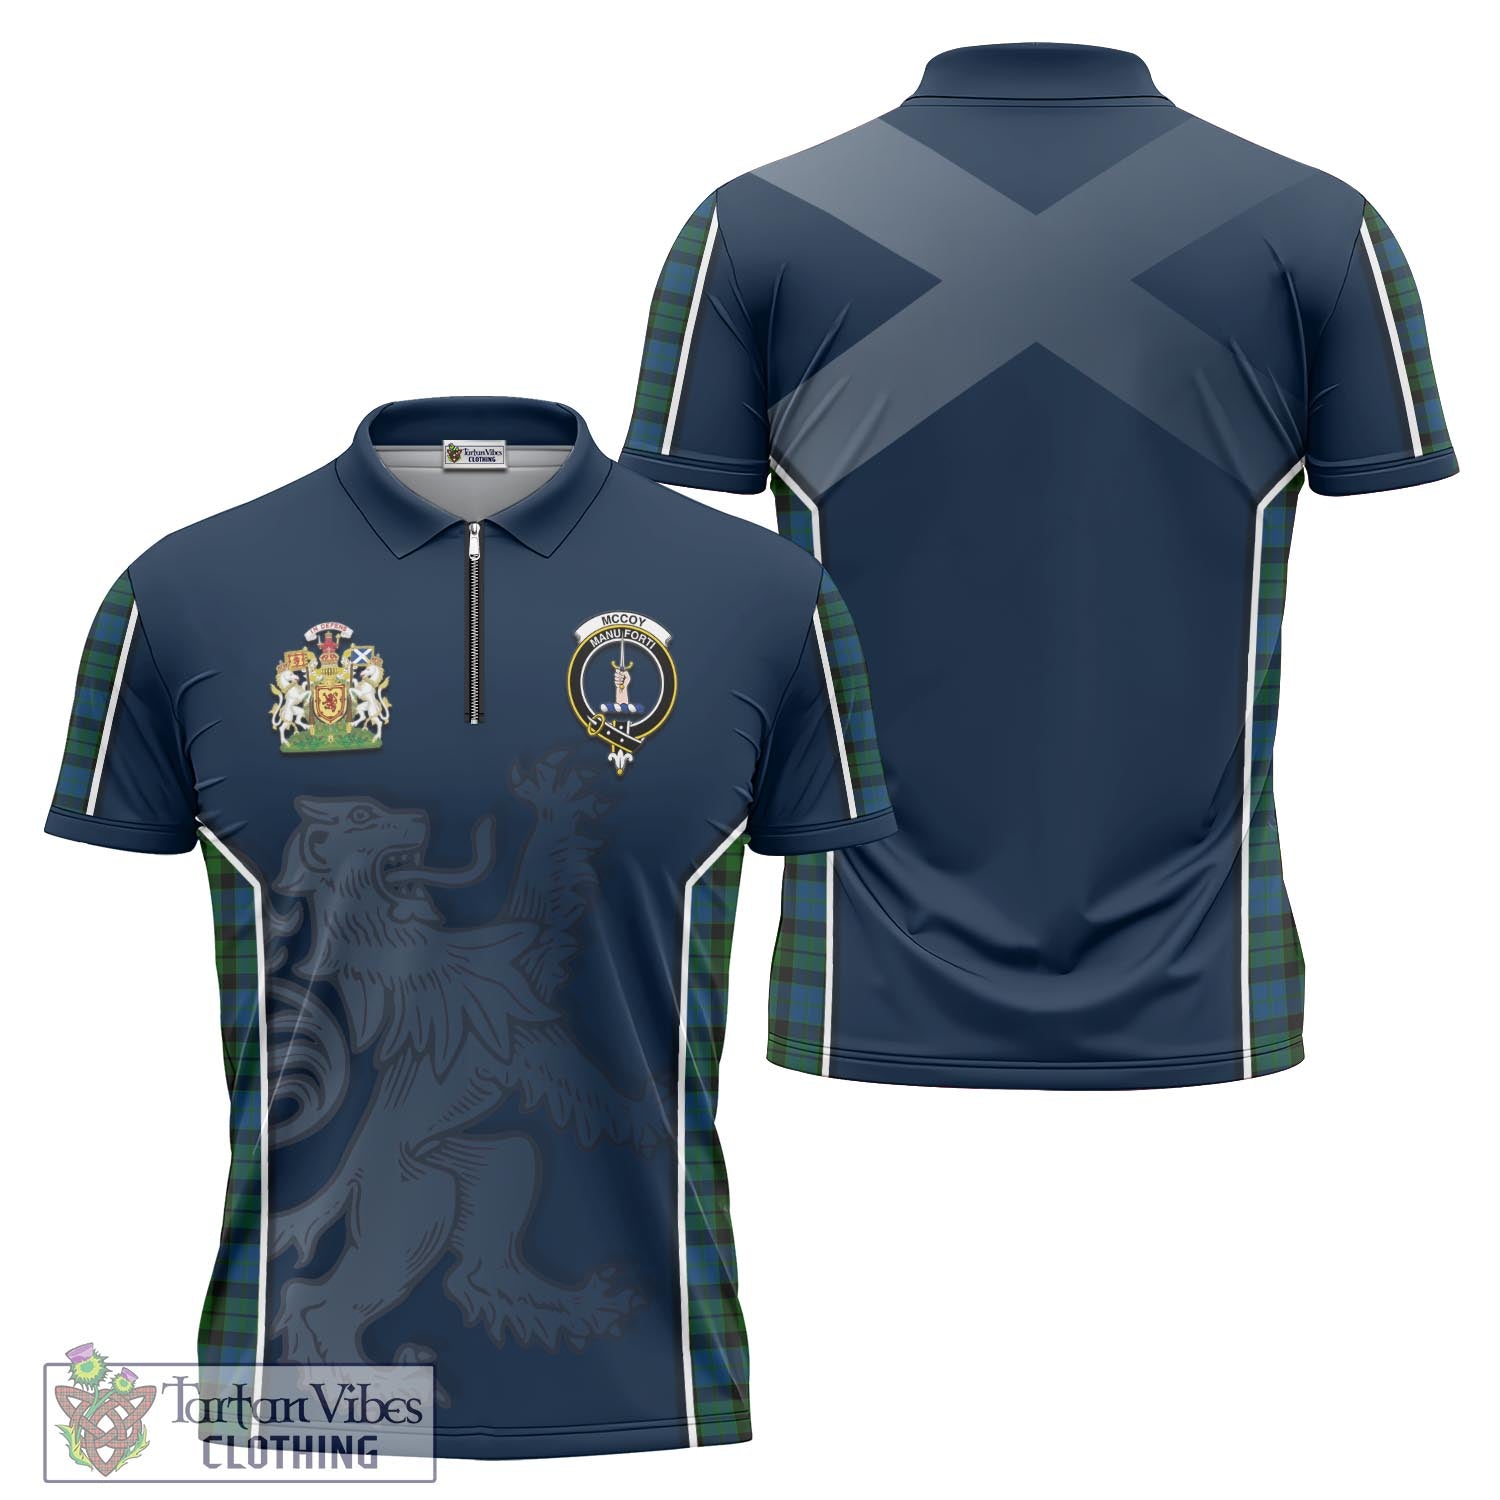 Tartan Vibes Clothing McCoy Tartan Zipper Polo Shirt with Family Crest and Lion Rampant Vibes Sport Style